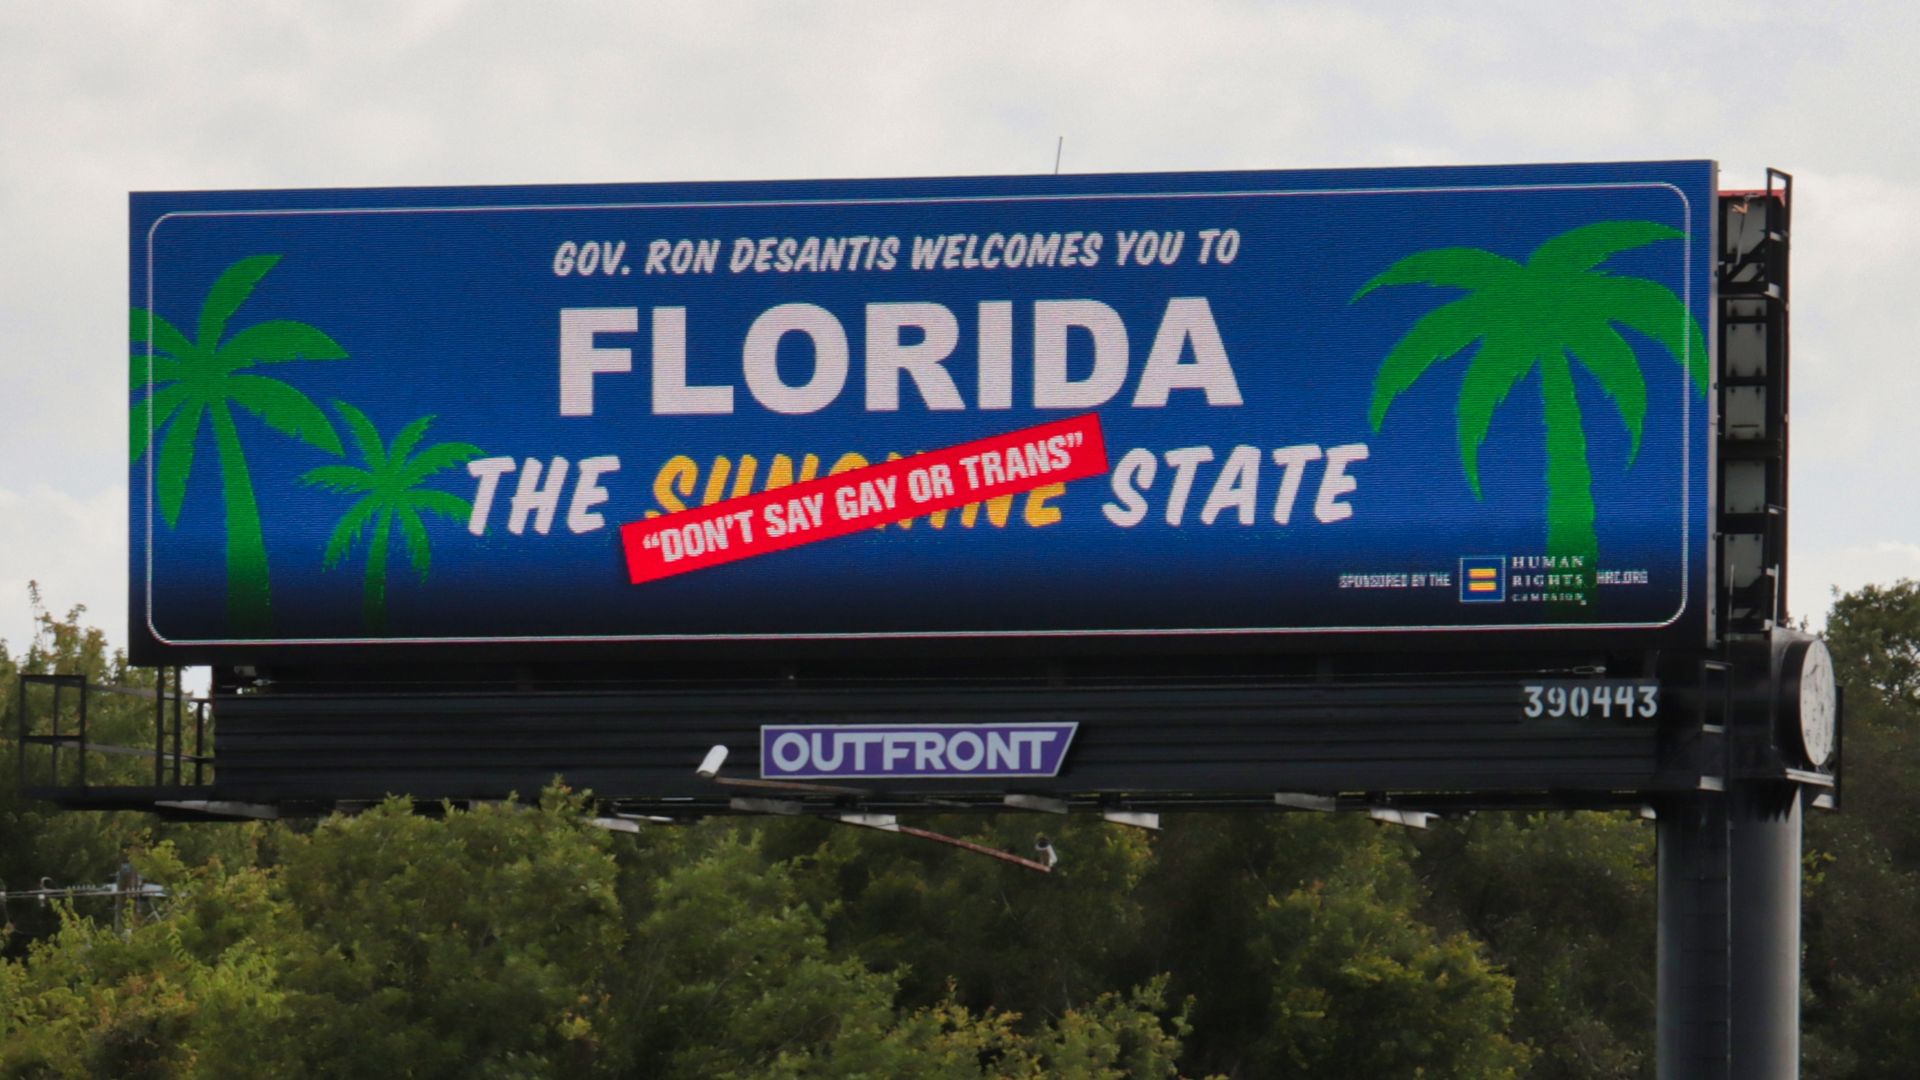 A billboard reading "Gov. Ron DeSantis welcomes you to FLORIDA the ("Sunshine" crossed out) "Don't say gay or trans" state"